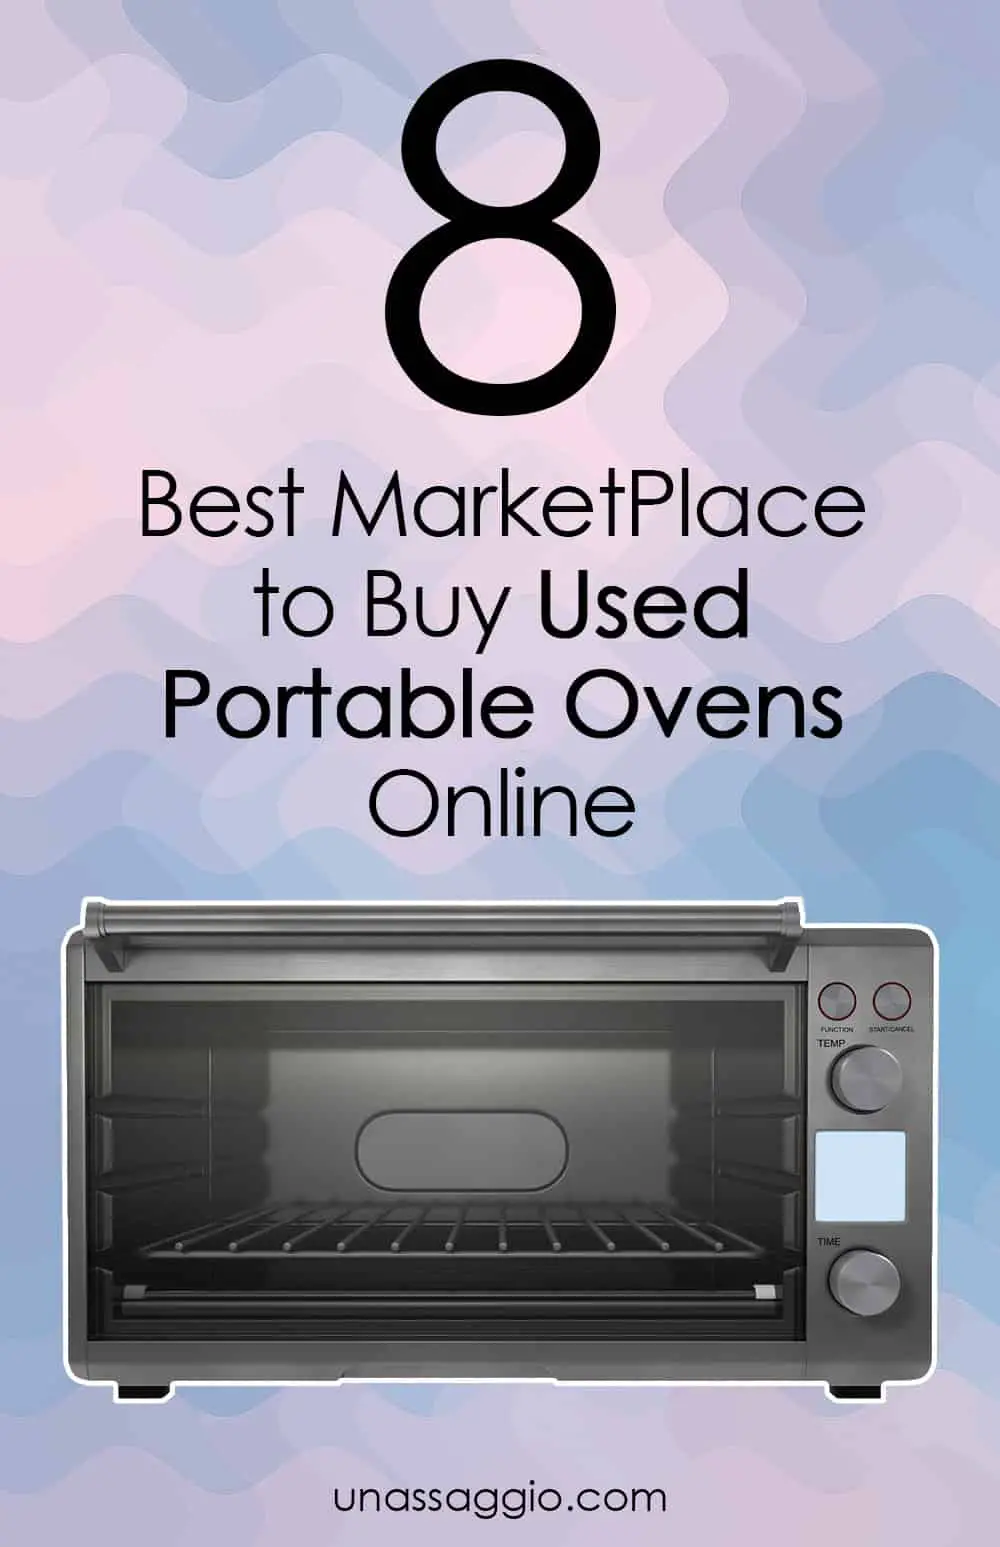 Where to Buy Used Portable Oven Online